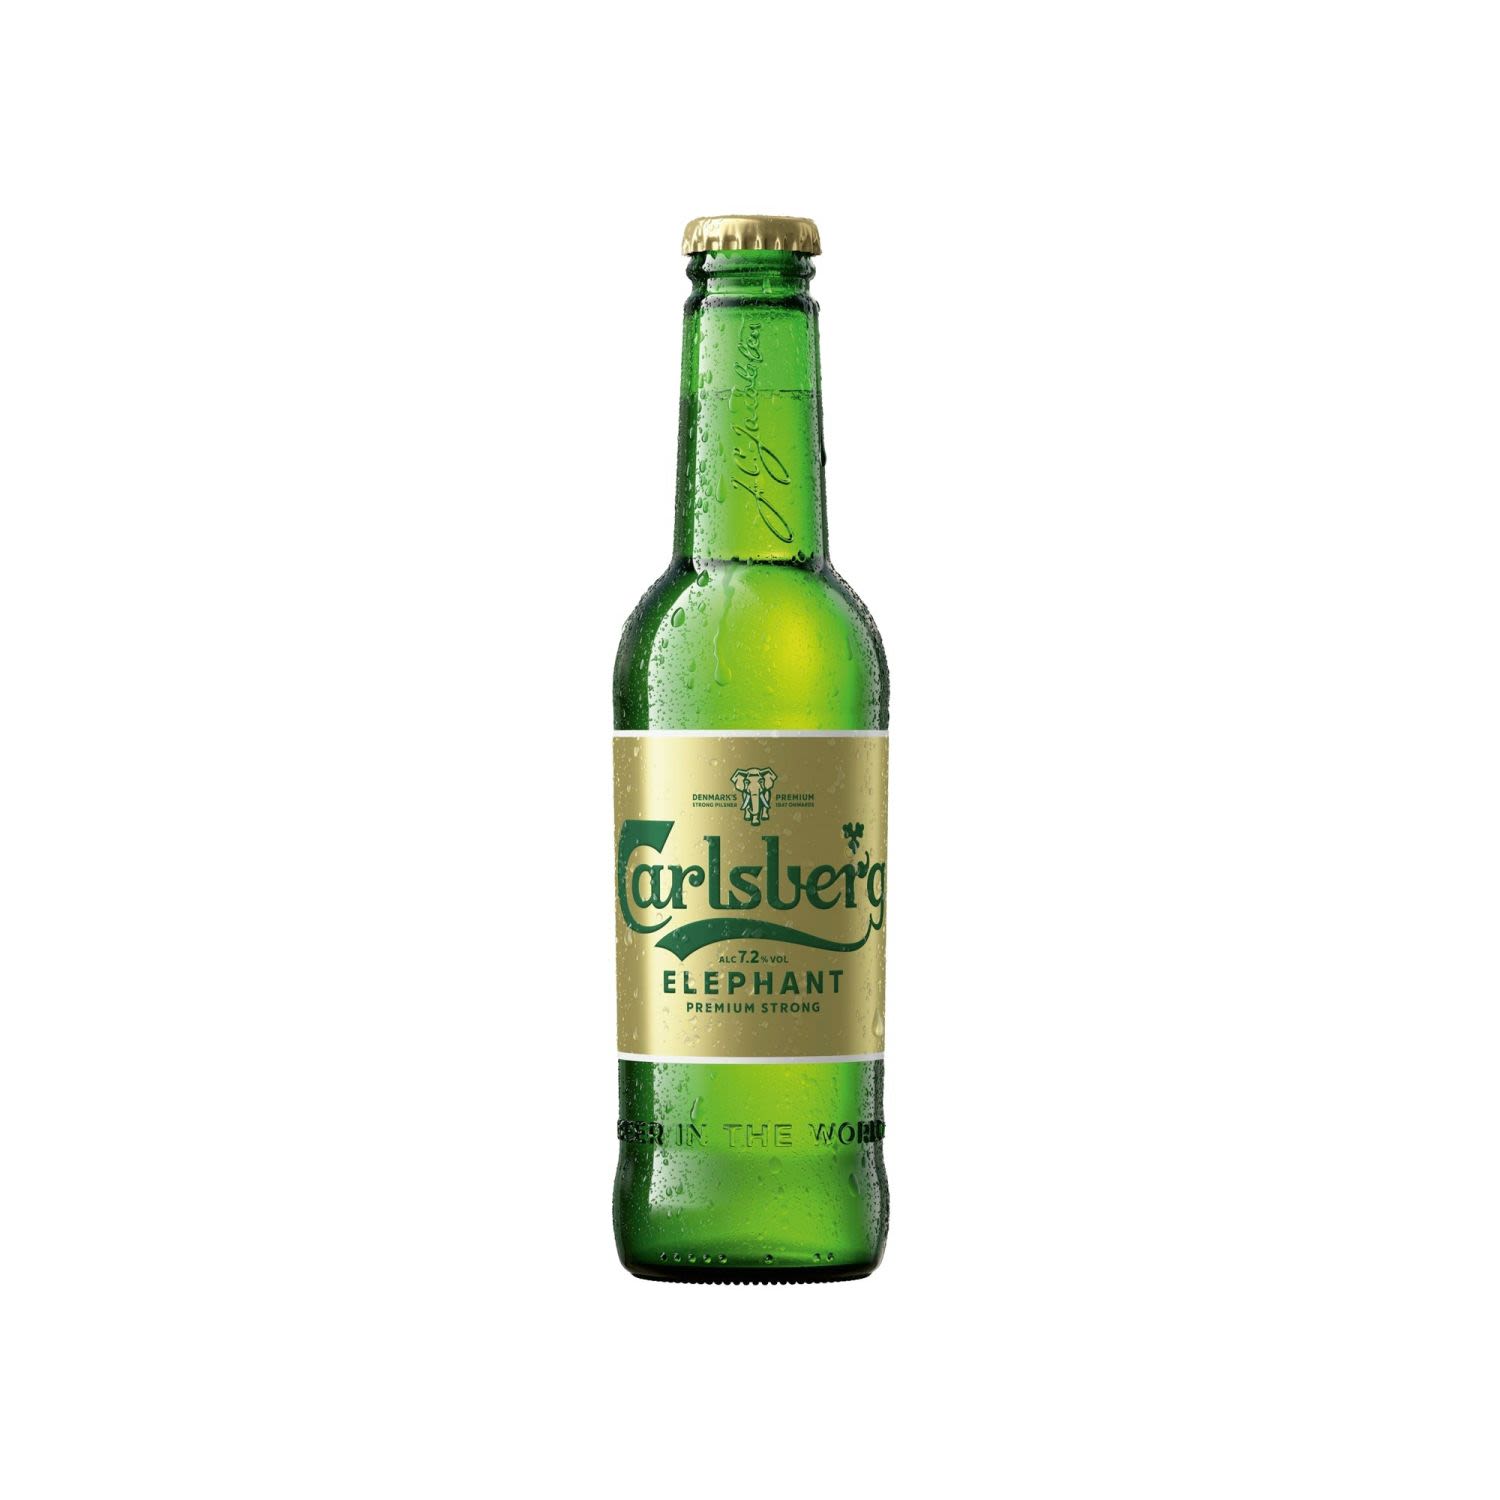 Carlsberg Elephant offers adventurous beer drinkers a unique and unforgettable taste experience. Pale gold in colour, Elephant is rich in malty character with a hint of caramel, balanced by a satisfyingly dry bitterness.<br /> <br />Alcohol Volume: 7.20%<br /><br />Pack Format: Bottle<br /><br />Standard Drinks: 1.9</br /><br />Pack Type: Bottle<br /><br />Country of Origin: Denmark<br />